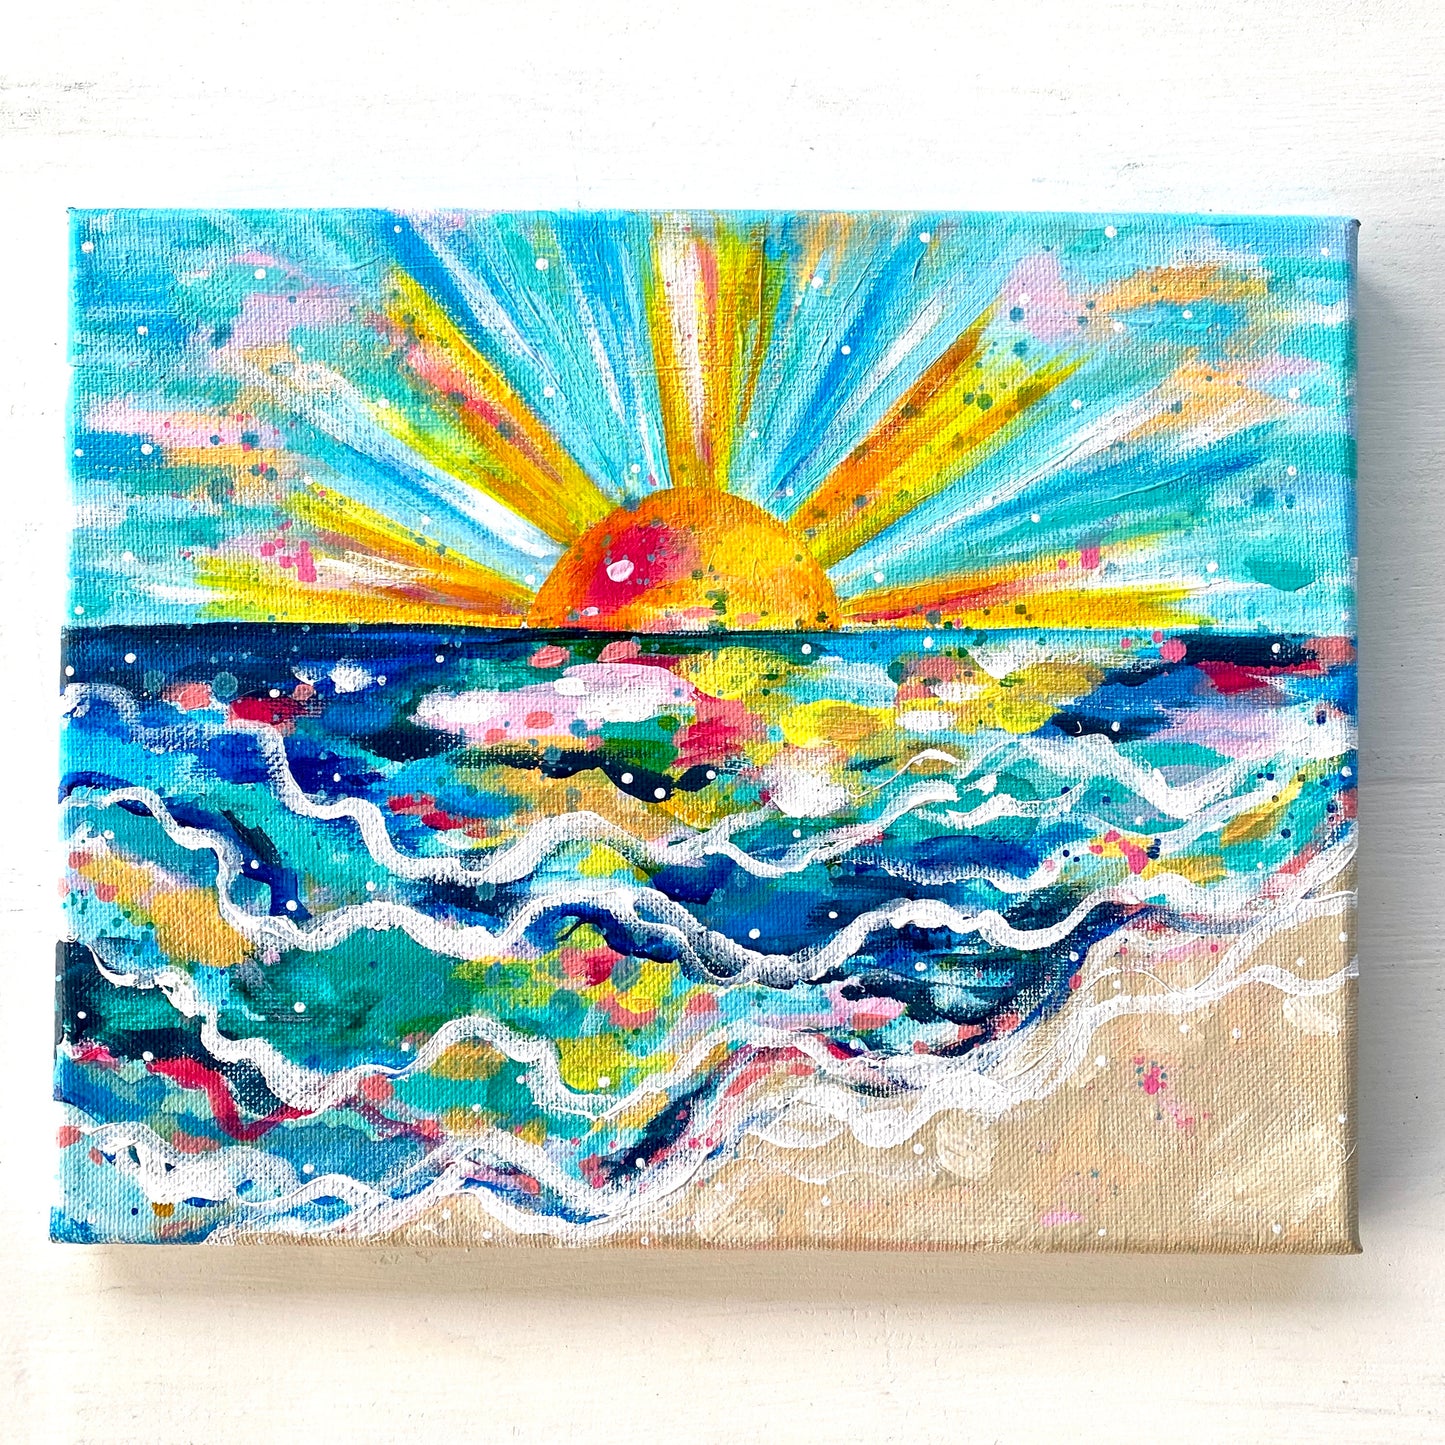 “Shimmer Rays” 8x10 inch original painting on canvas